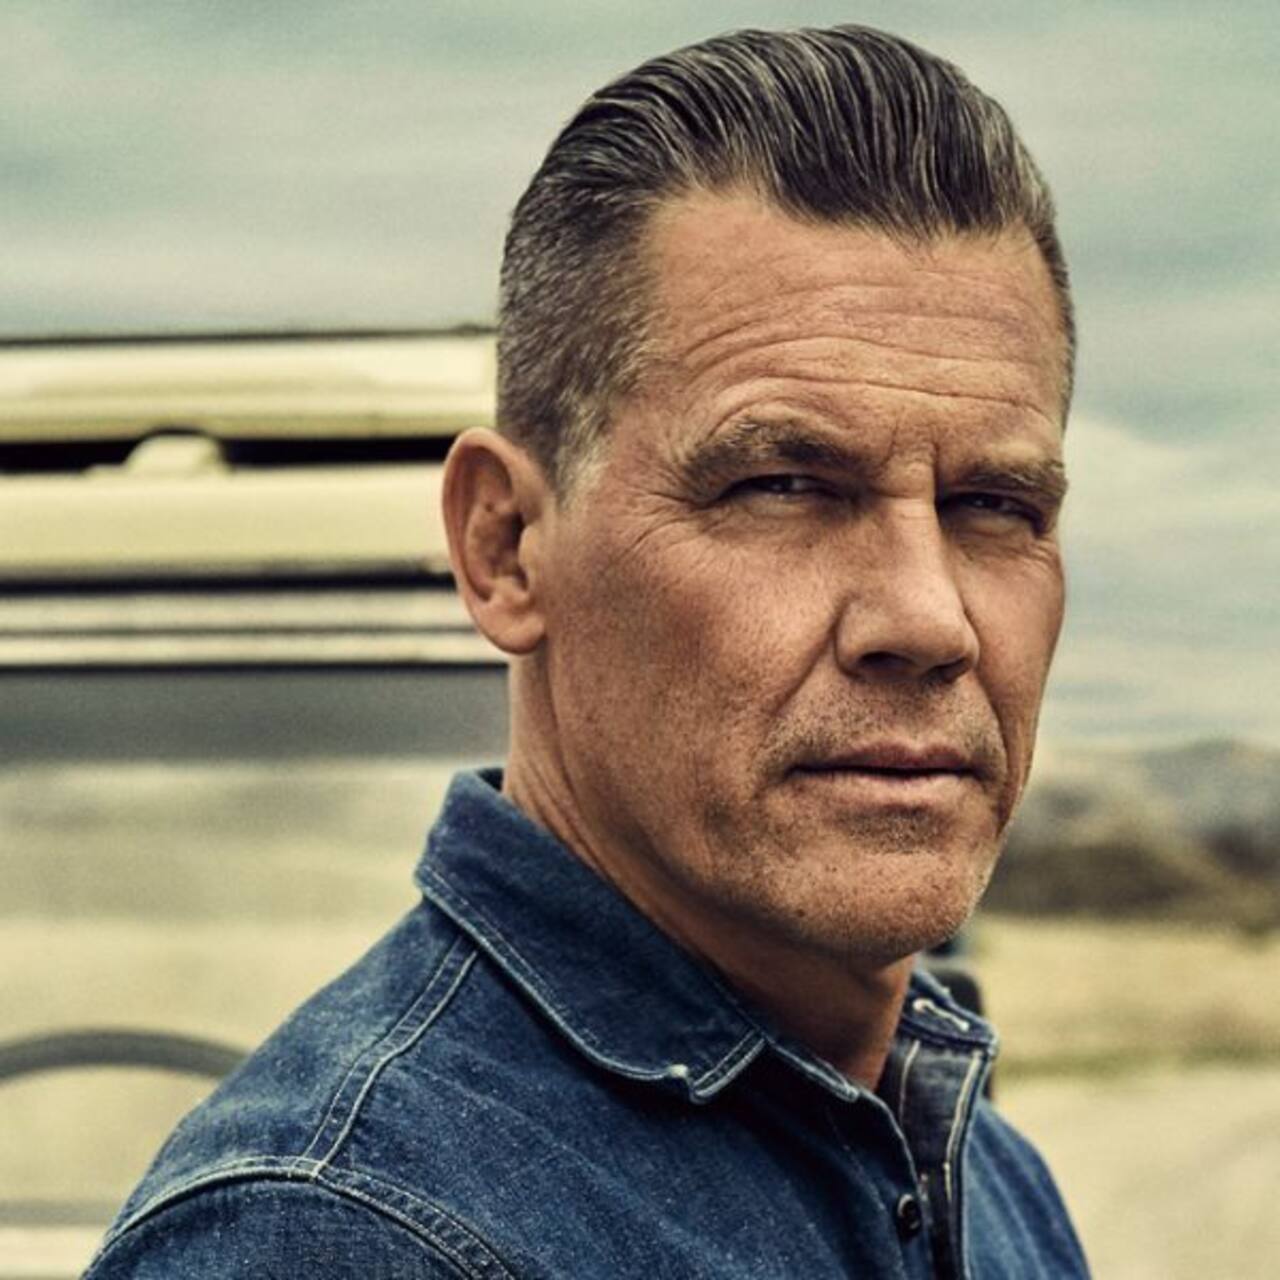 Josh Brolin shares a throwback photograph of himself playing Holi in India